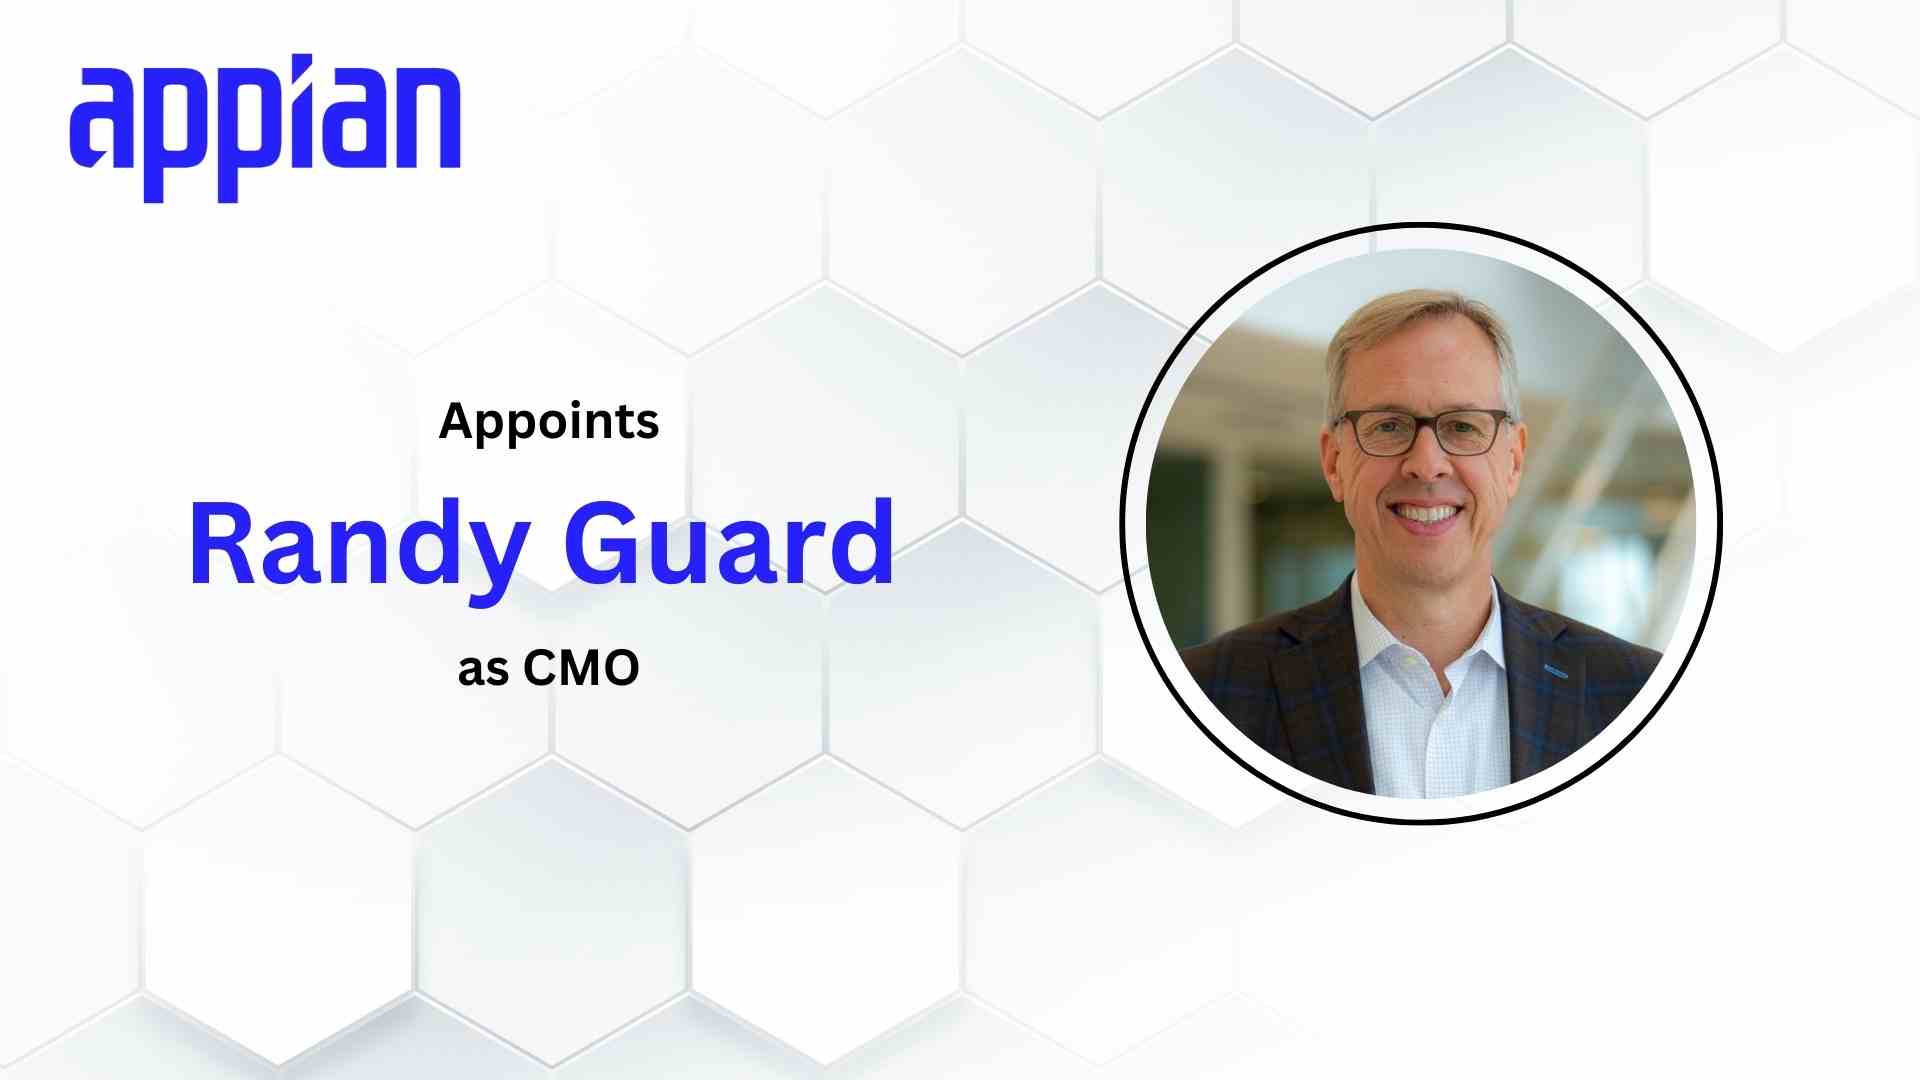 Appian Appoints Randy Guard as Chief Marketing Officer